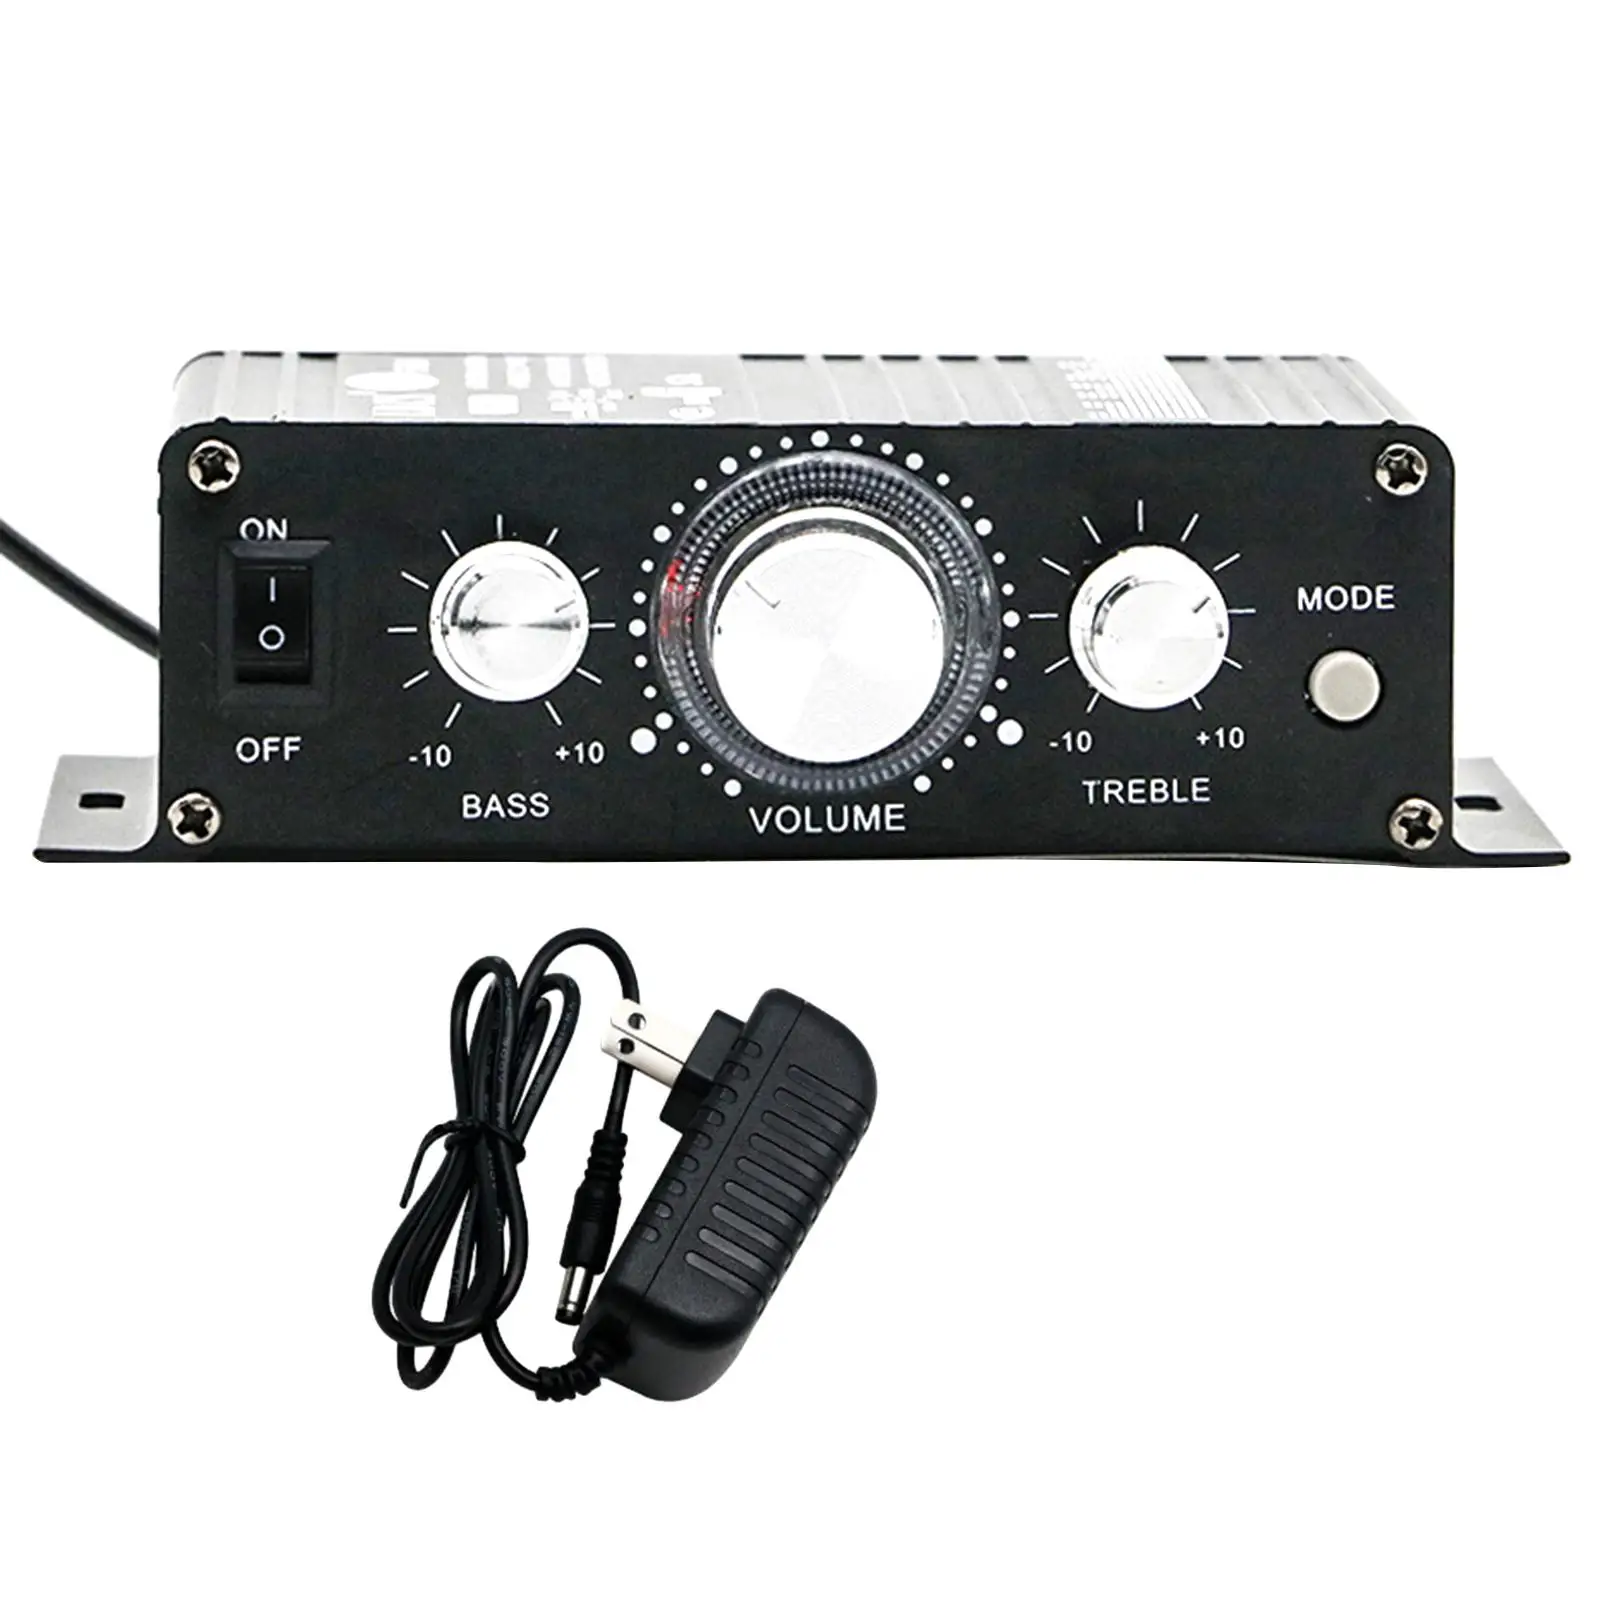 Bluetooth Power Amplifier Small with Bass and Treble Control 2 Channel Audio Amplifier HiFi Stereo for Home Theater Bar Car